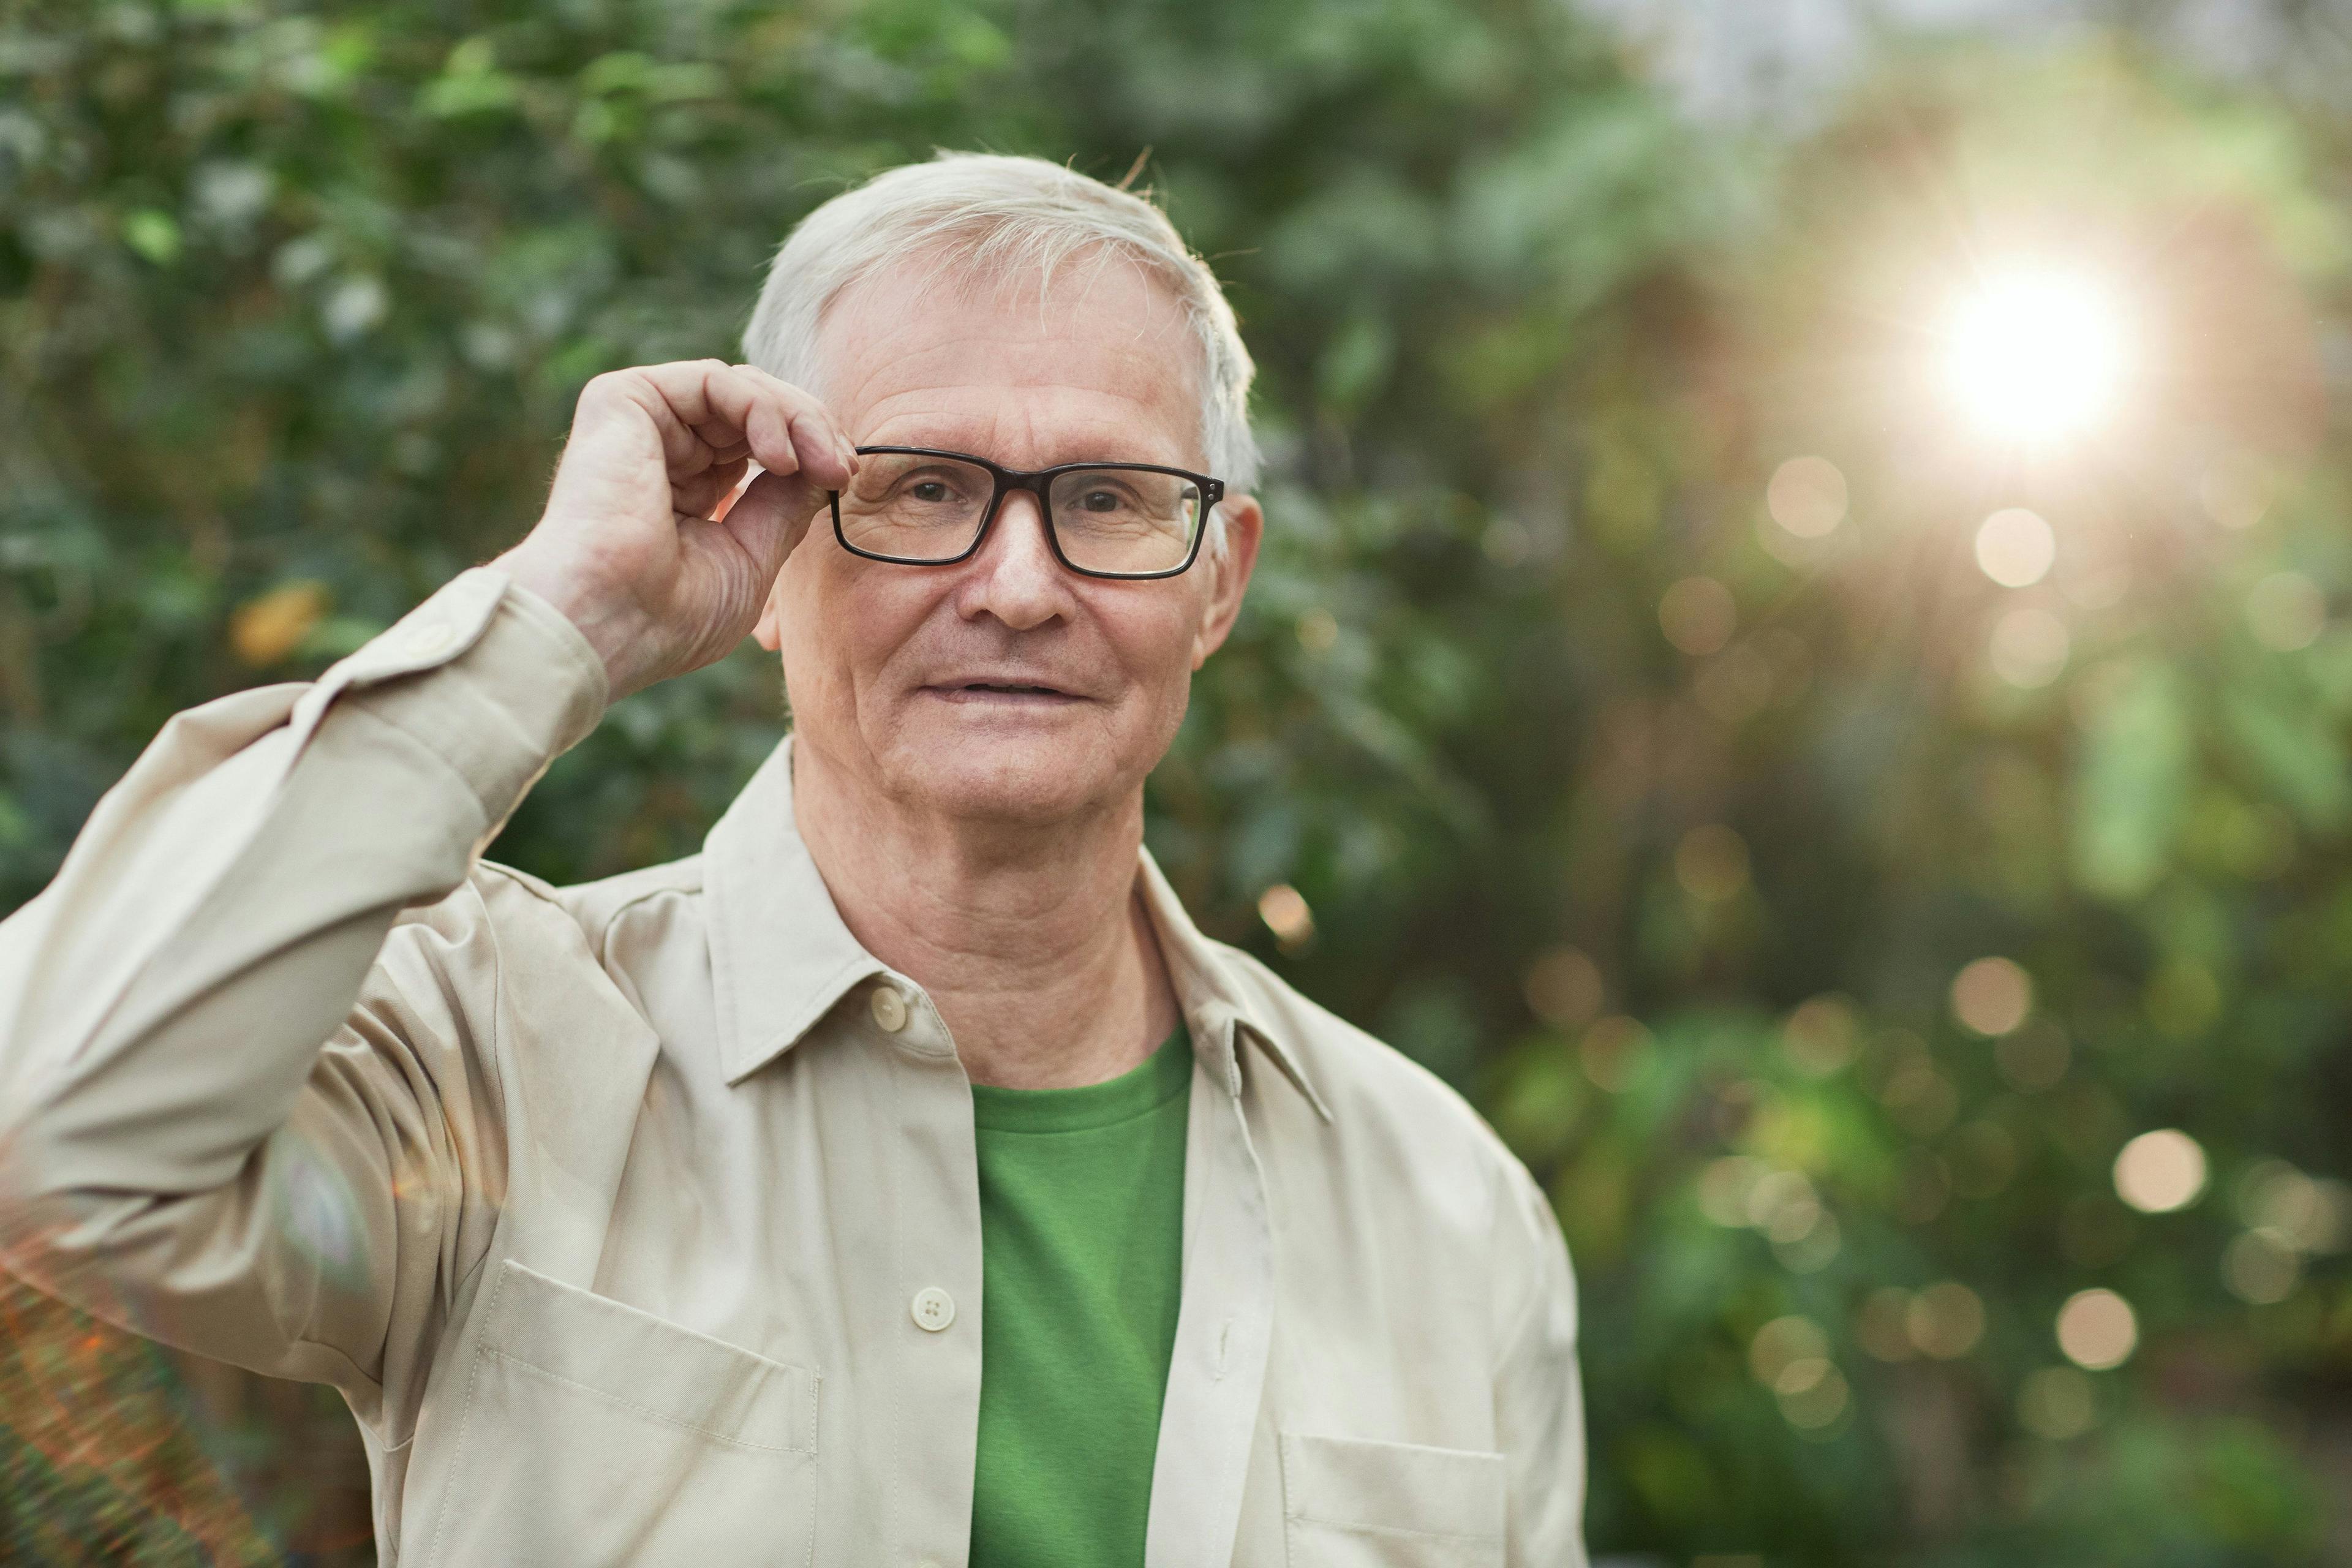 Family History, Cardiovascular Disease Linked to Risk of Age-Related Macular Degeneration